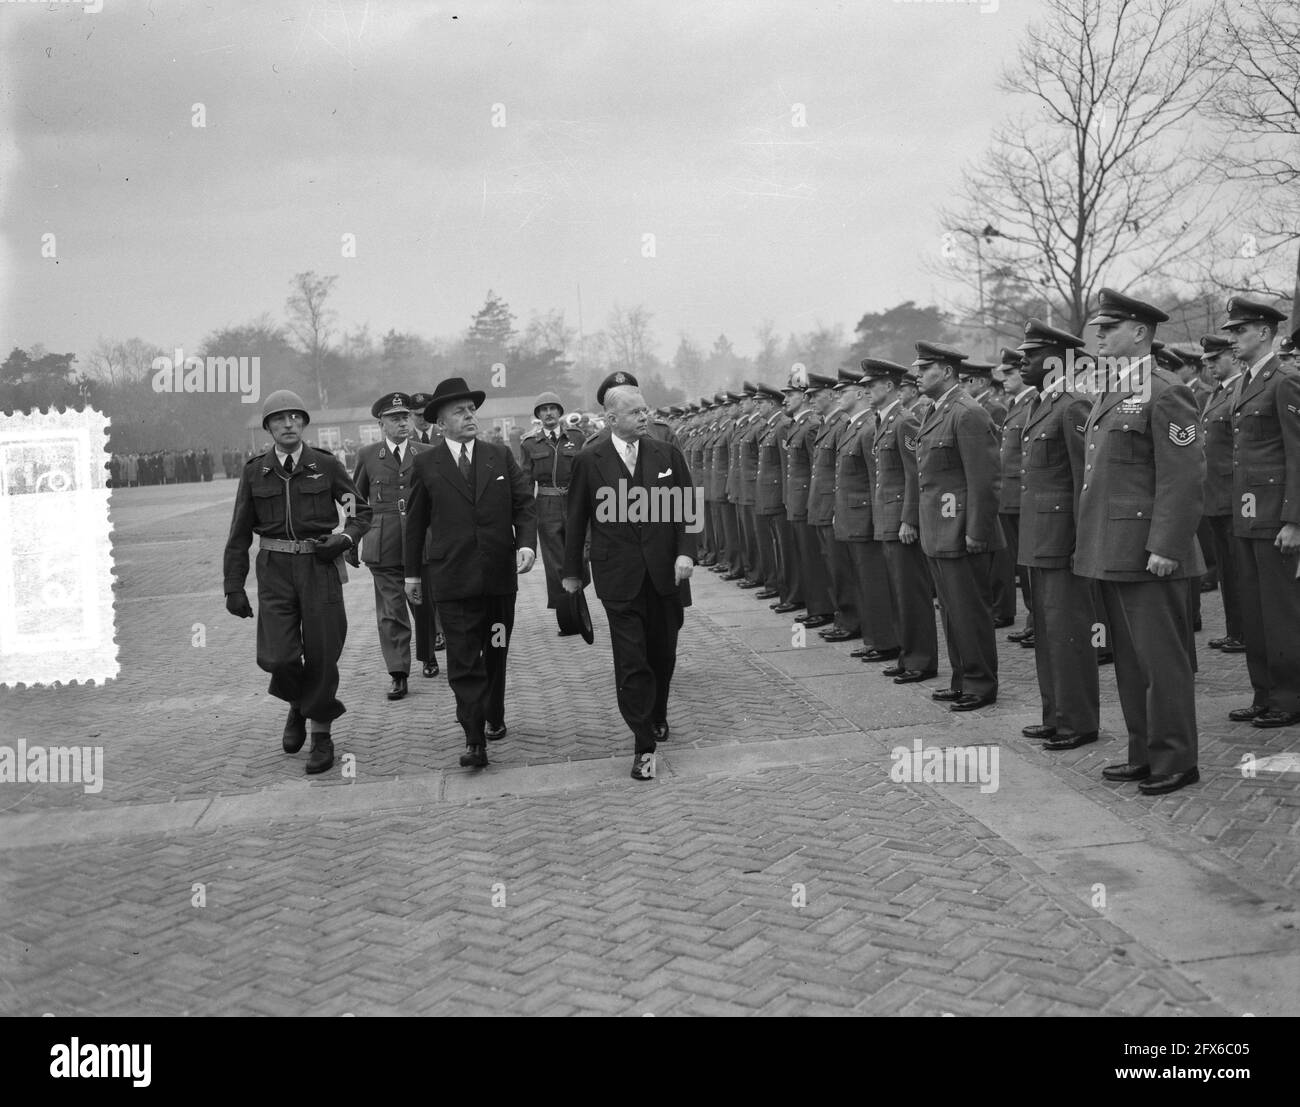 The U.S. 32 Tactical Fighter Squadron (stationed at Soesterberg, and consisting of Sabre aircraft) is placed under the operational command of the Royal Air Force. Minister of War C. Staf and U.S. Ambassador H. Freeman Matthews inspect the honor guard, November 16, 1954, diplomats, air force, military, ministers, transfers, The Netherlands, 20th century press agency photo, news to remember, documentary, historic photography 1945-1990, visual stories, human history of the Twentieth Century, capturing moments in time Stock Photo